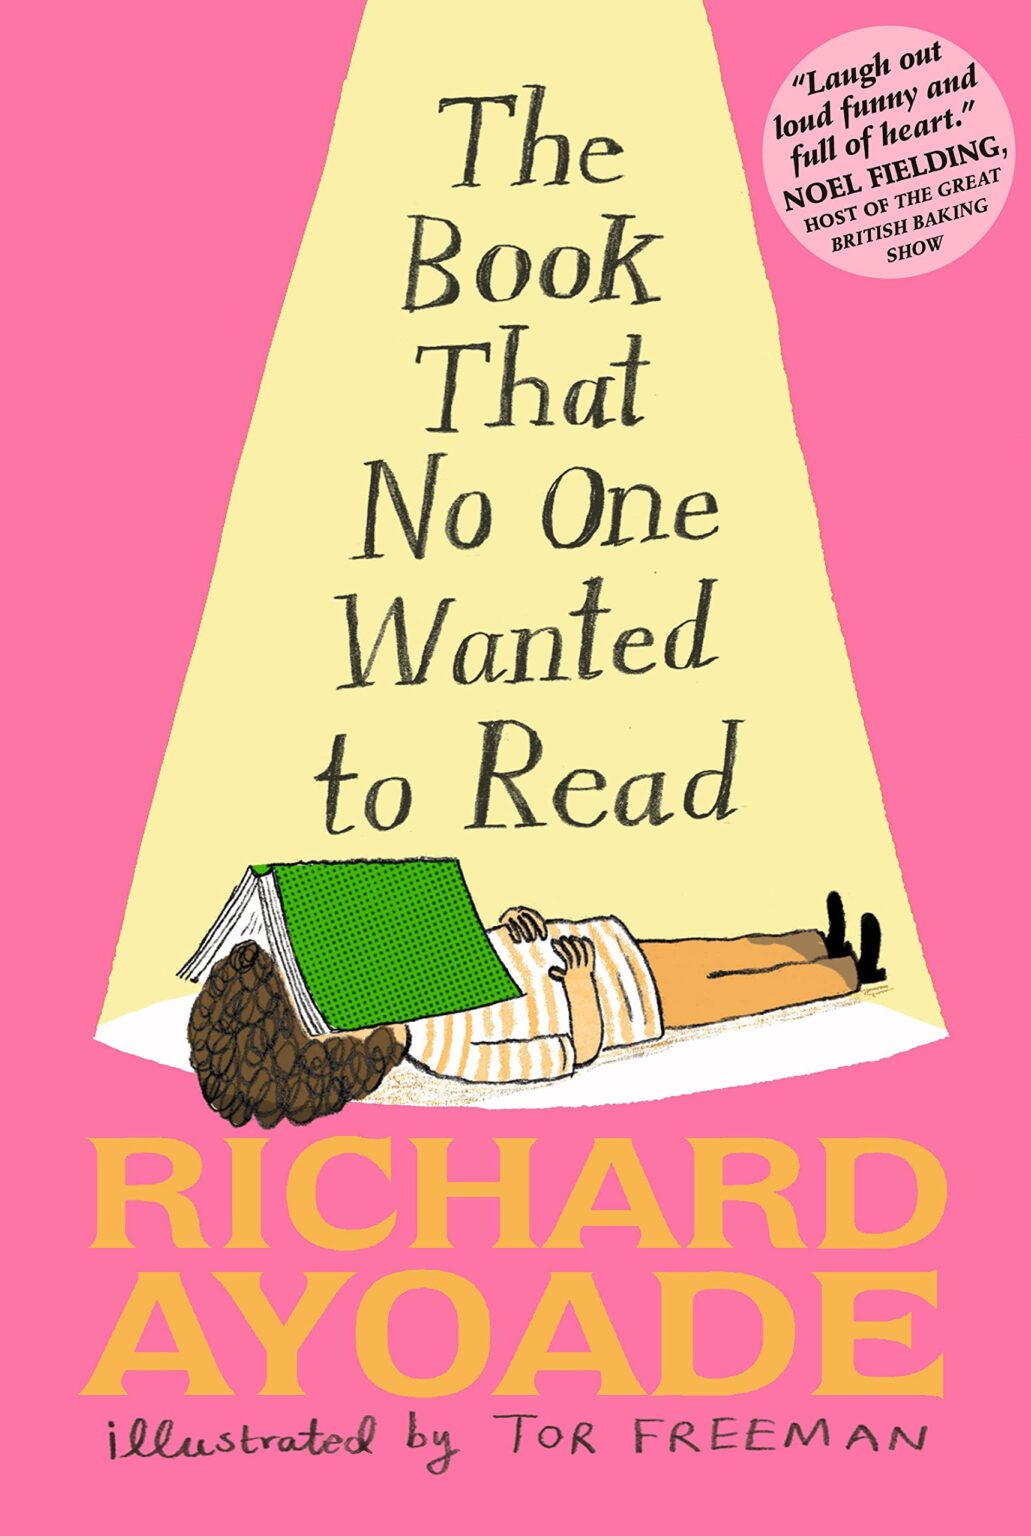 Book Review “the Book That No One Wanted To Read” By Richard Ayoade Illustrated By Tor Freeman